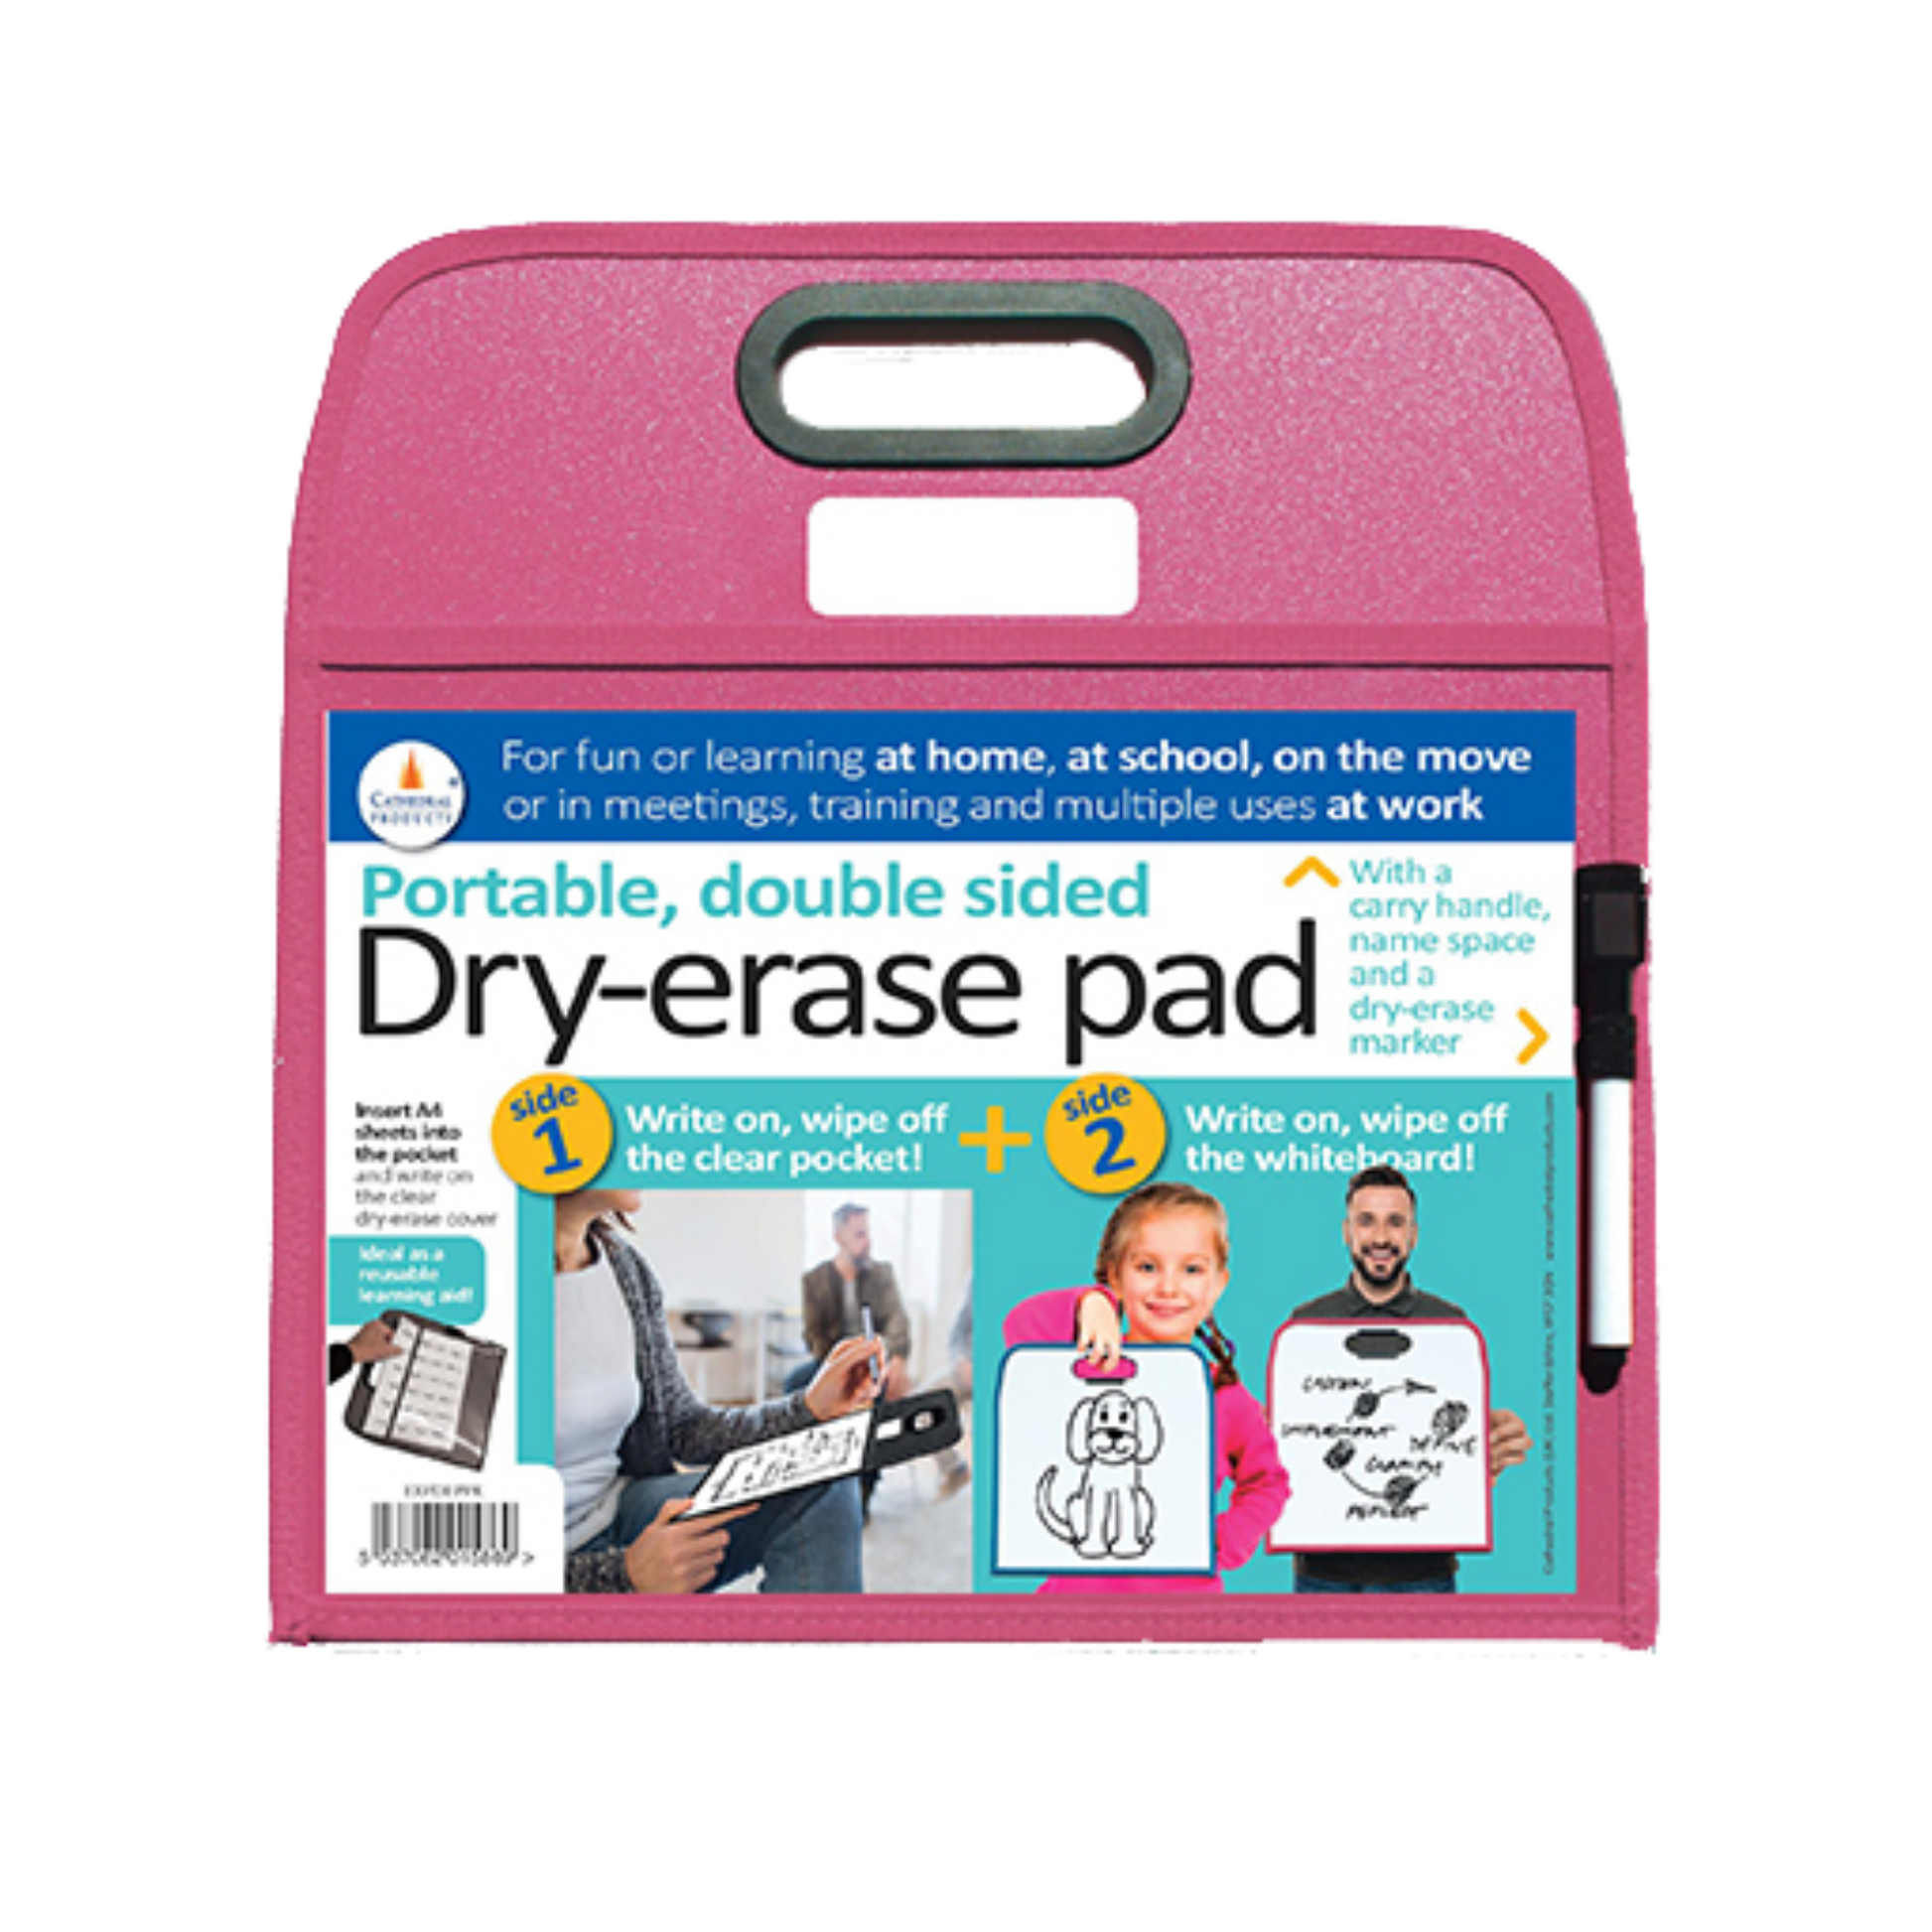 Portable, double-sided pink dry-erase pad with a carry handle, designed for versatile use at home, school, or work. The pad includes a clear pocket on one side and a whiteboard on the other, with packaging insert showing a person holding the pad and a child's drawing of a dog. There is an elastic loop on the right hand side of the board, with a dry erase pen, with a small eraser on the cap.